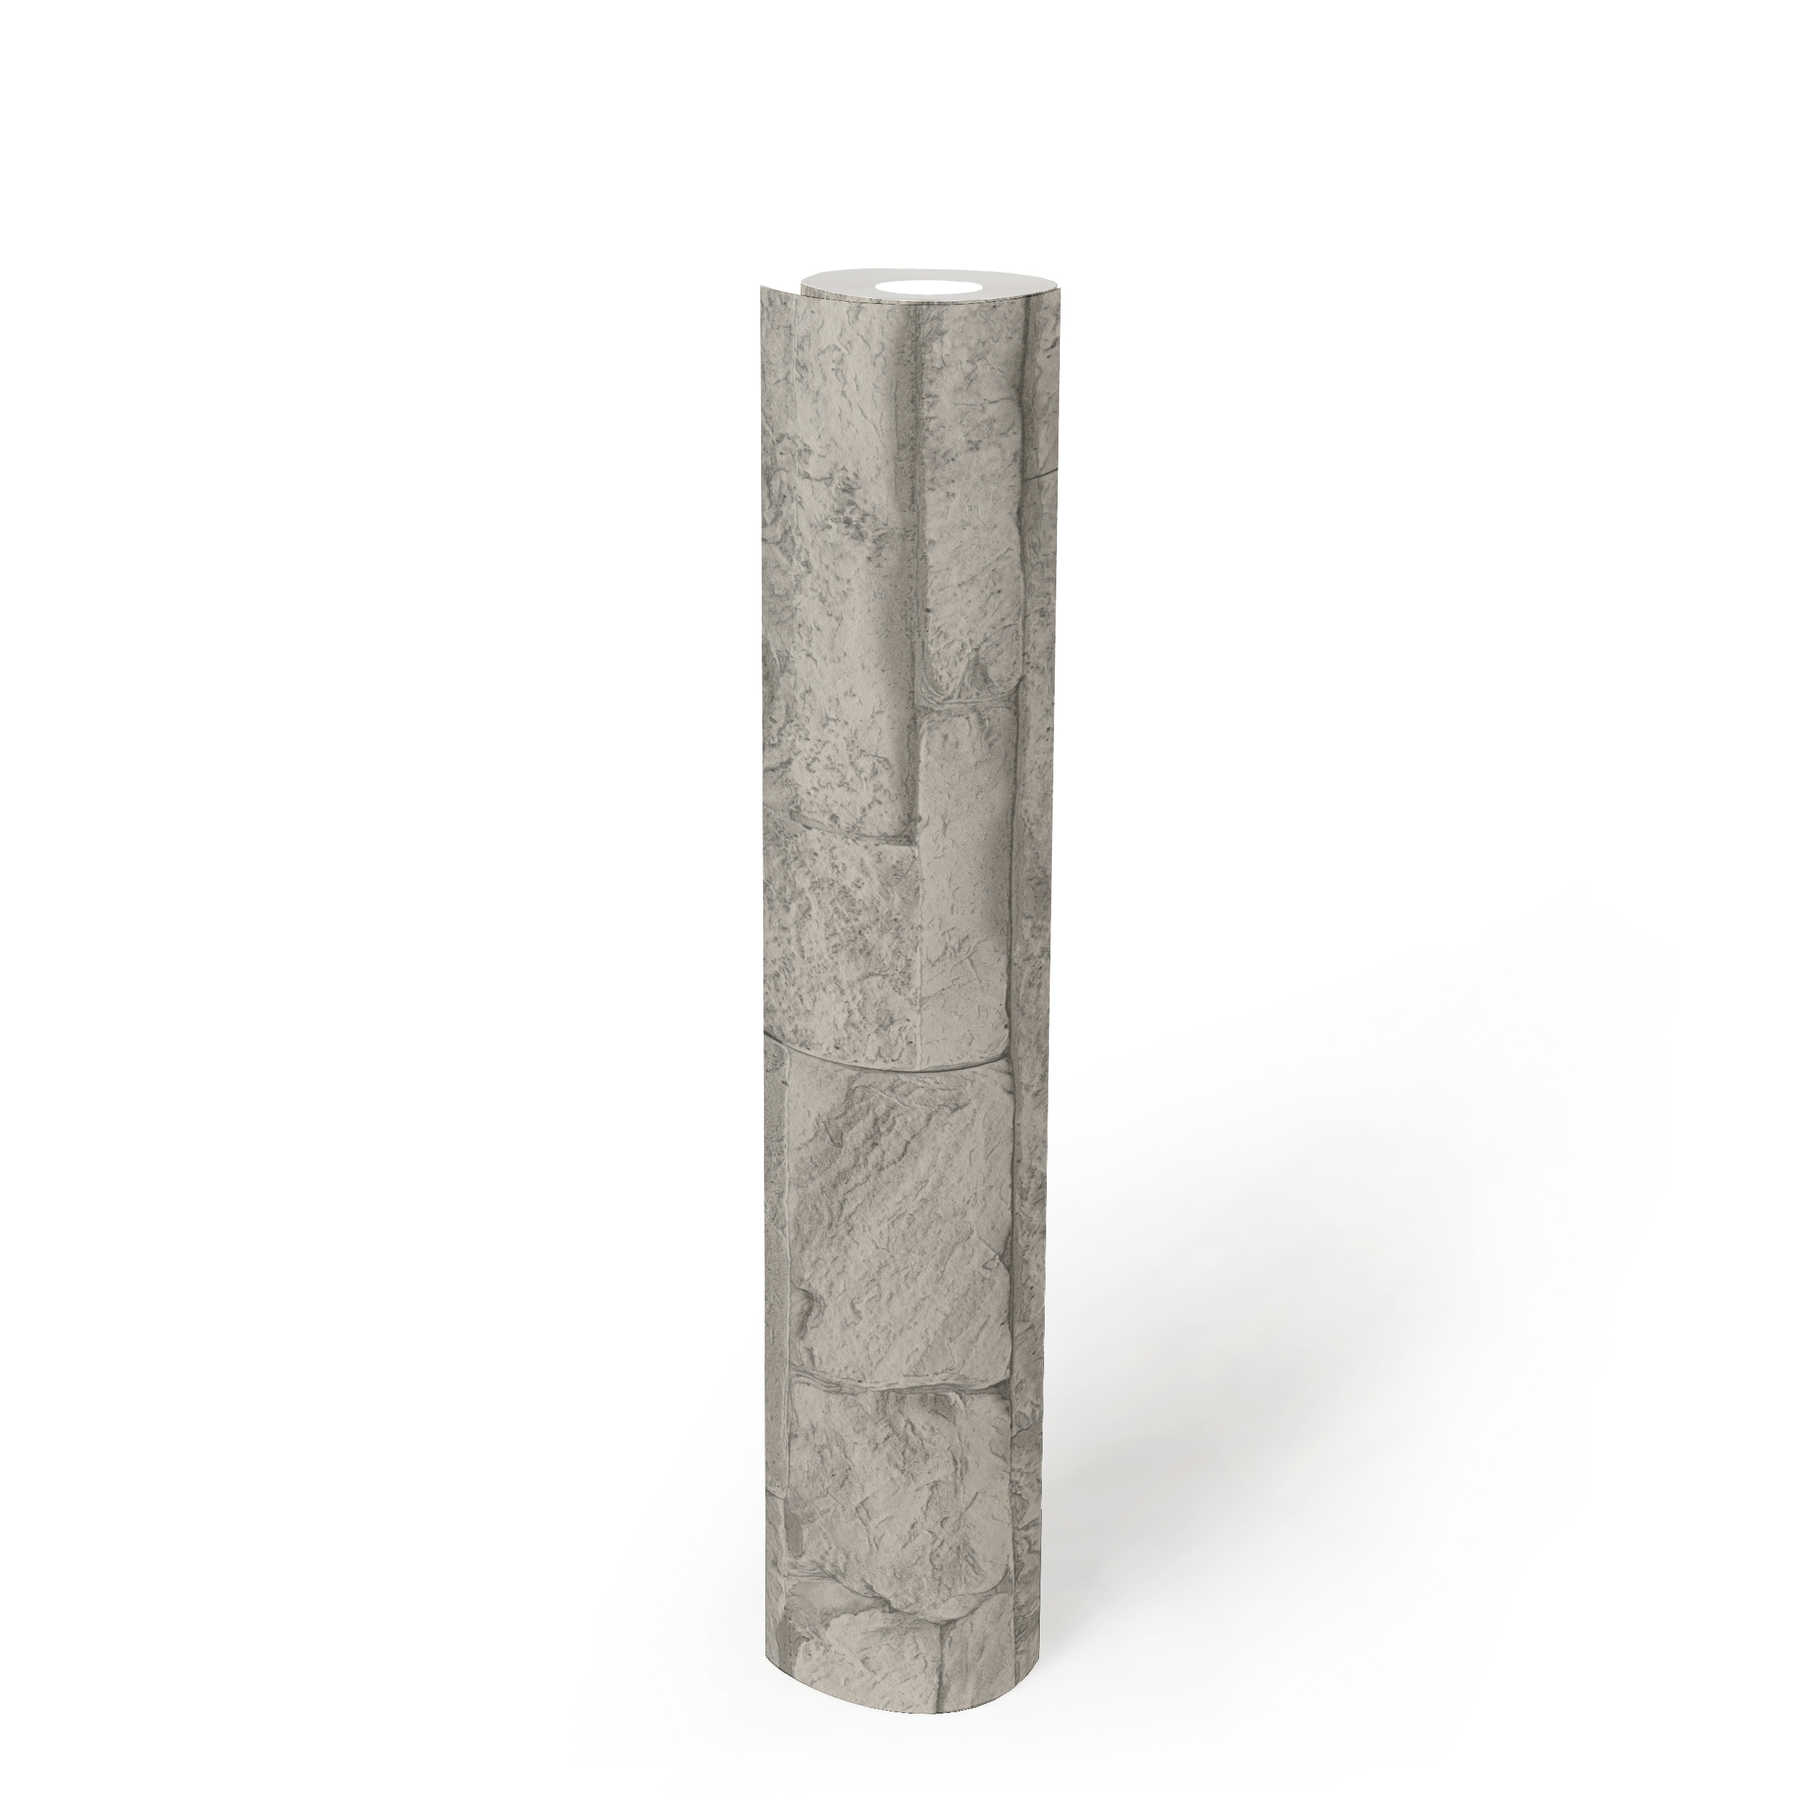             Wallpaper natural stone look detailed & realistic - grey, white
        